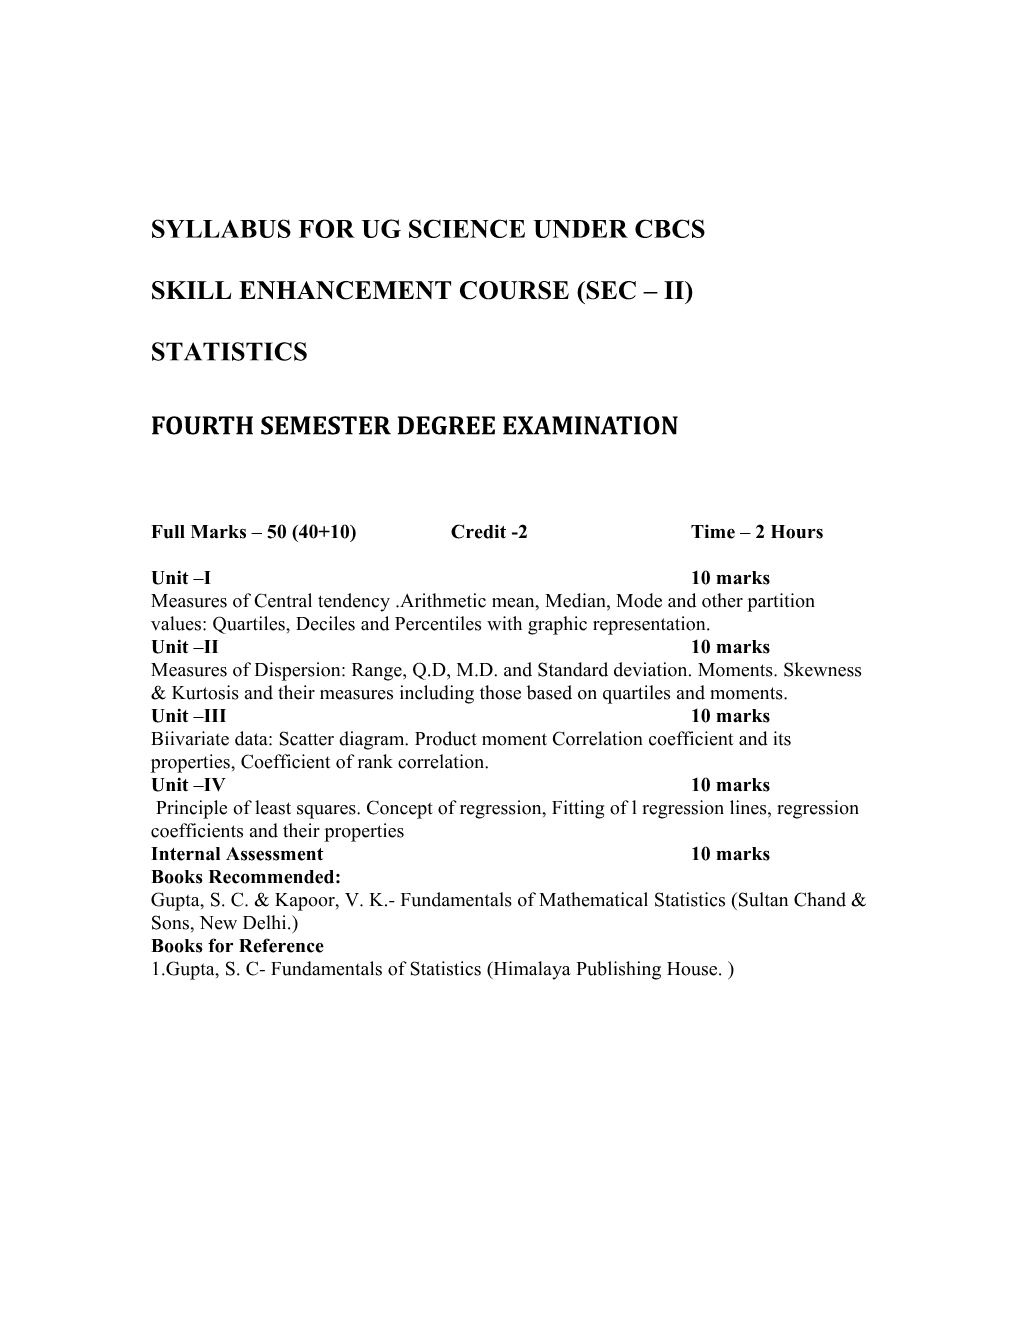 Syllabus for Ug Science Under Cbcs